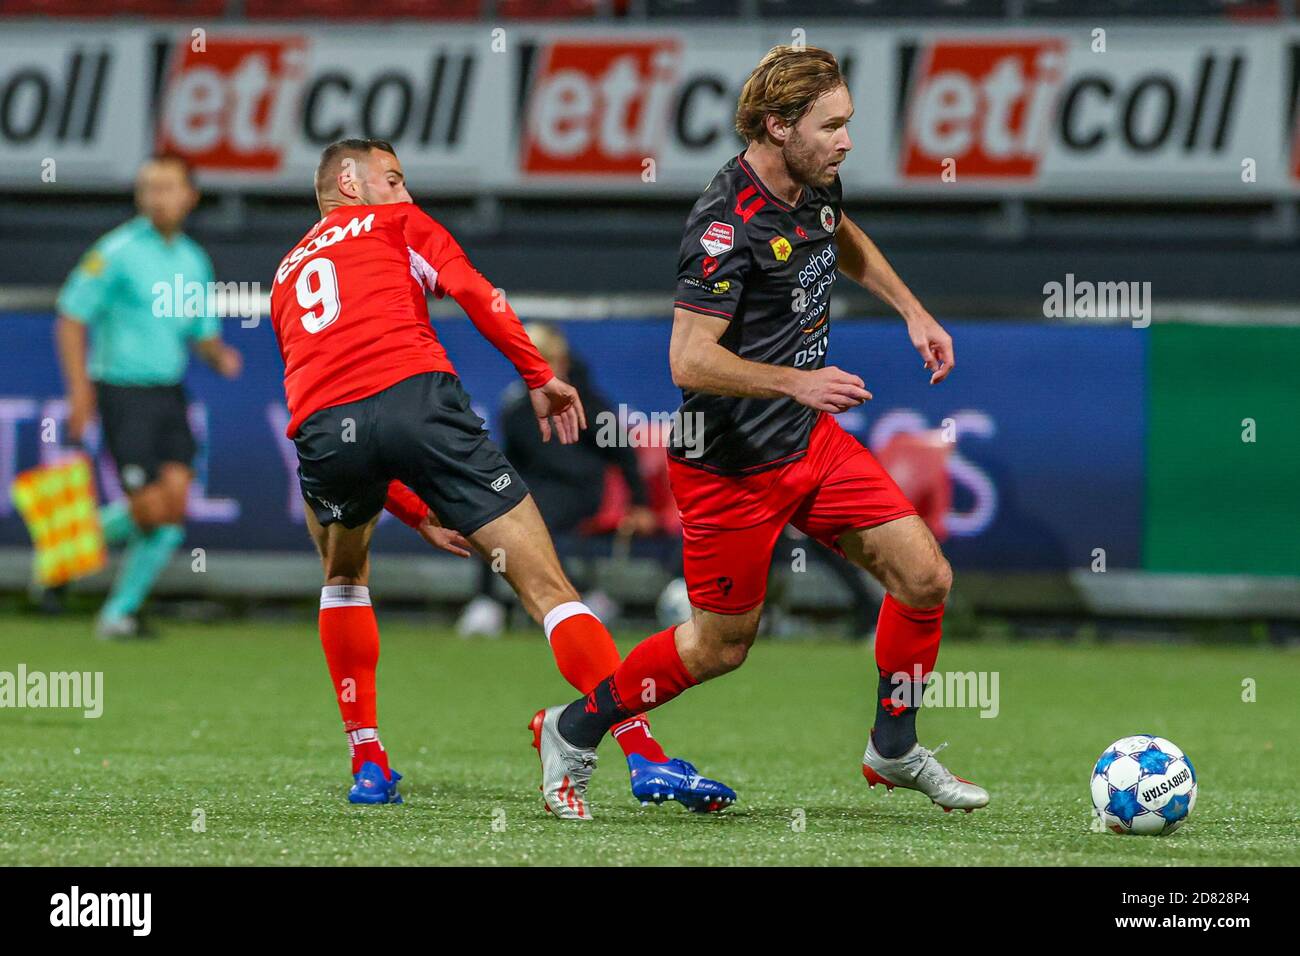 ROTTERDAM, NETHERLANDS - OCTOBER 26: Jordy Thomassen of Helmond Sport,  Thomas Verhaar of Excelsior during the first round of the Dutch TOTO KNVB  Cup match between Excelsior and Helmond Sport at Van